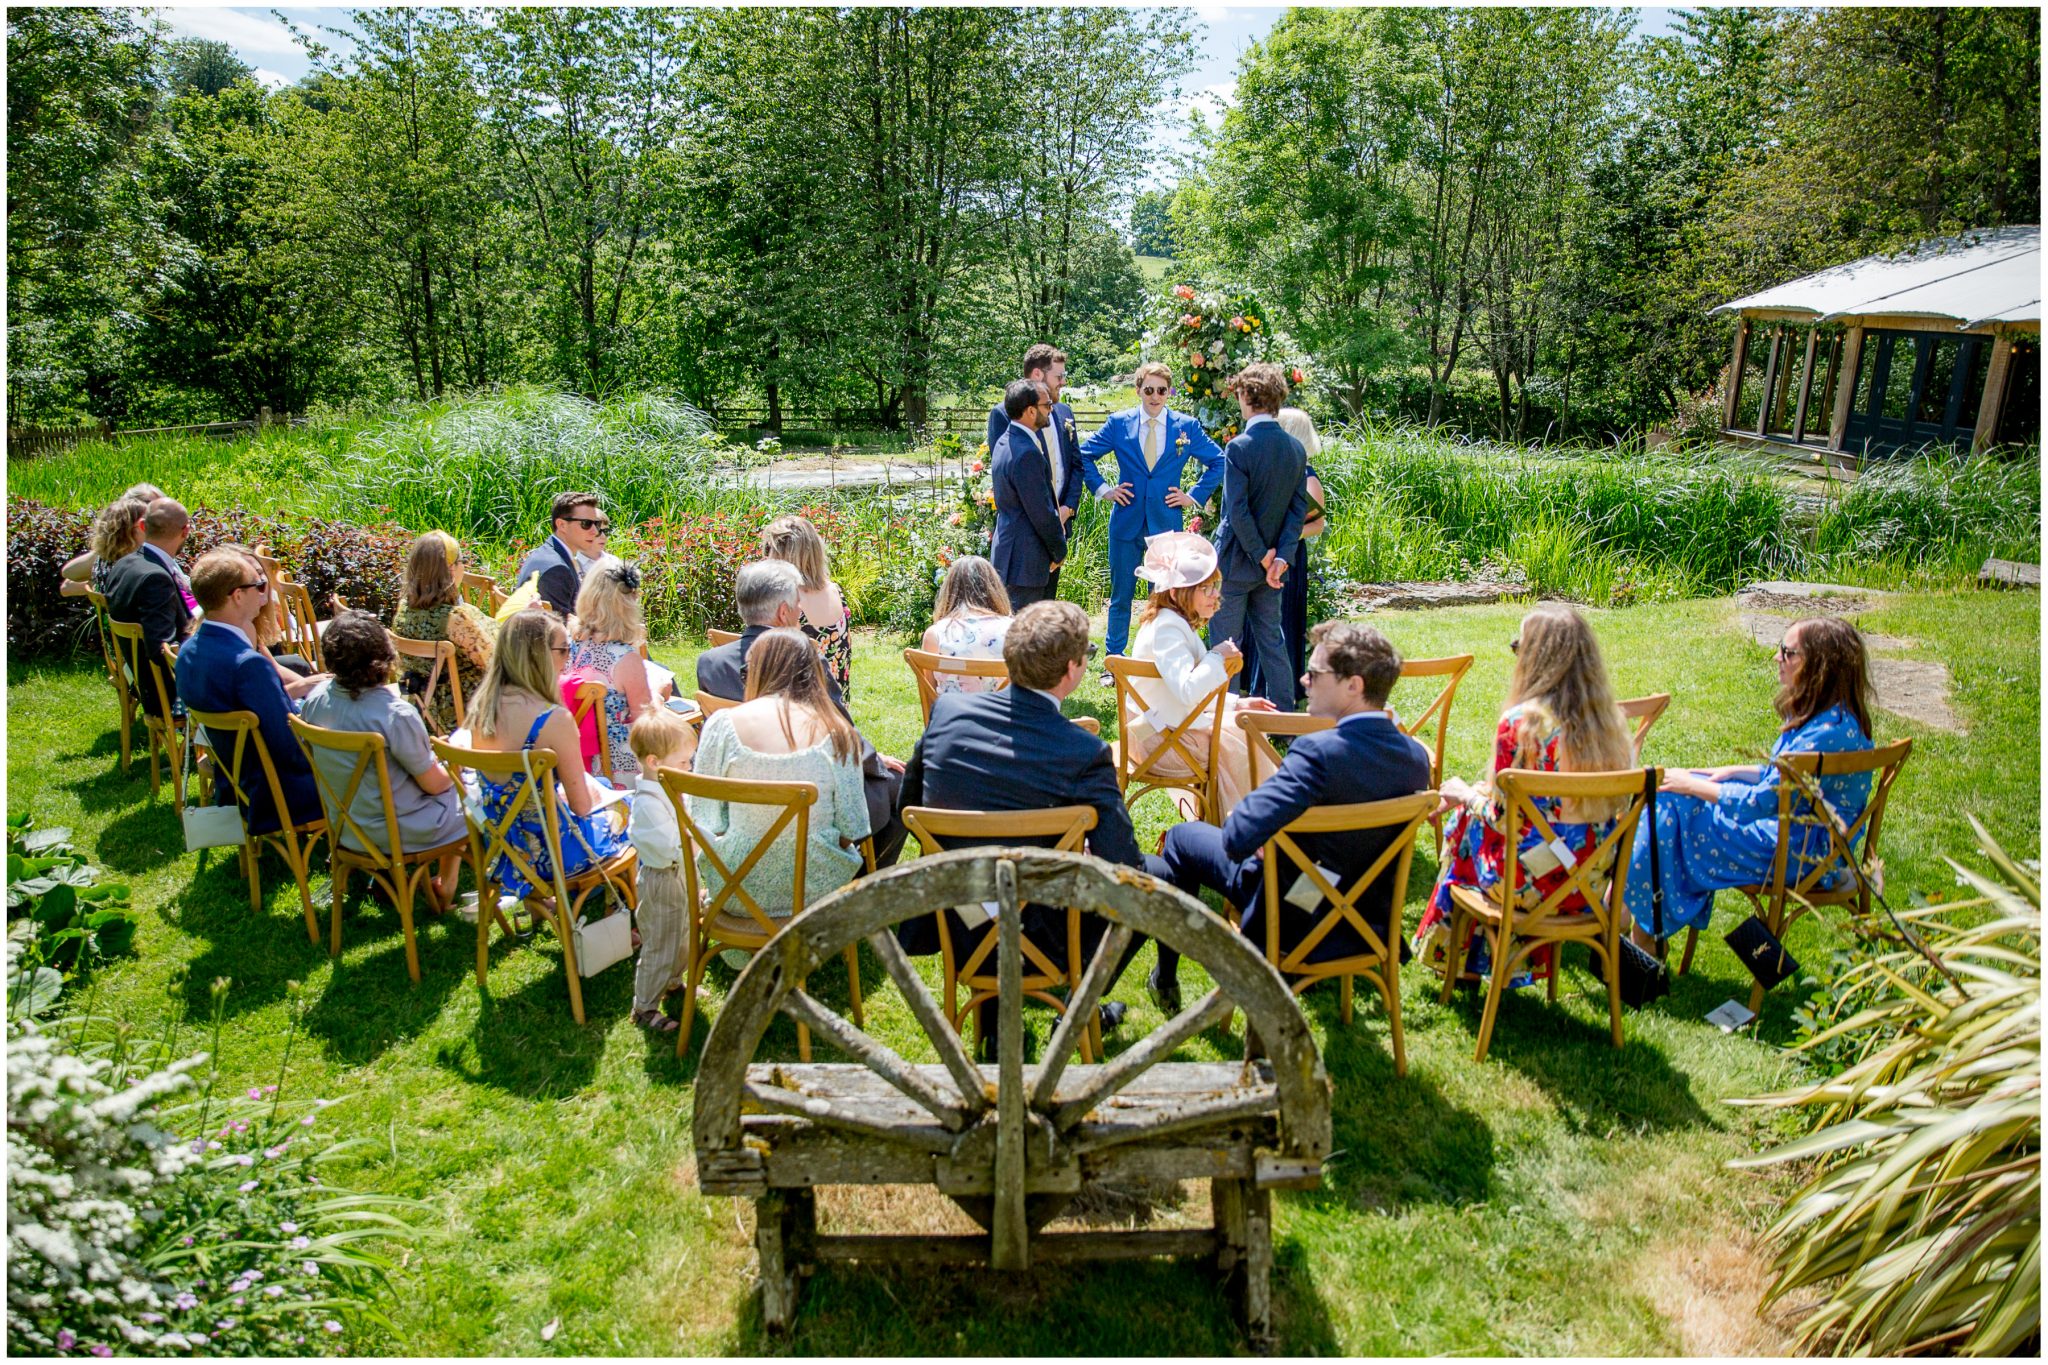 Groom and groomsmen stood in the outdoor ceremony before the wedding